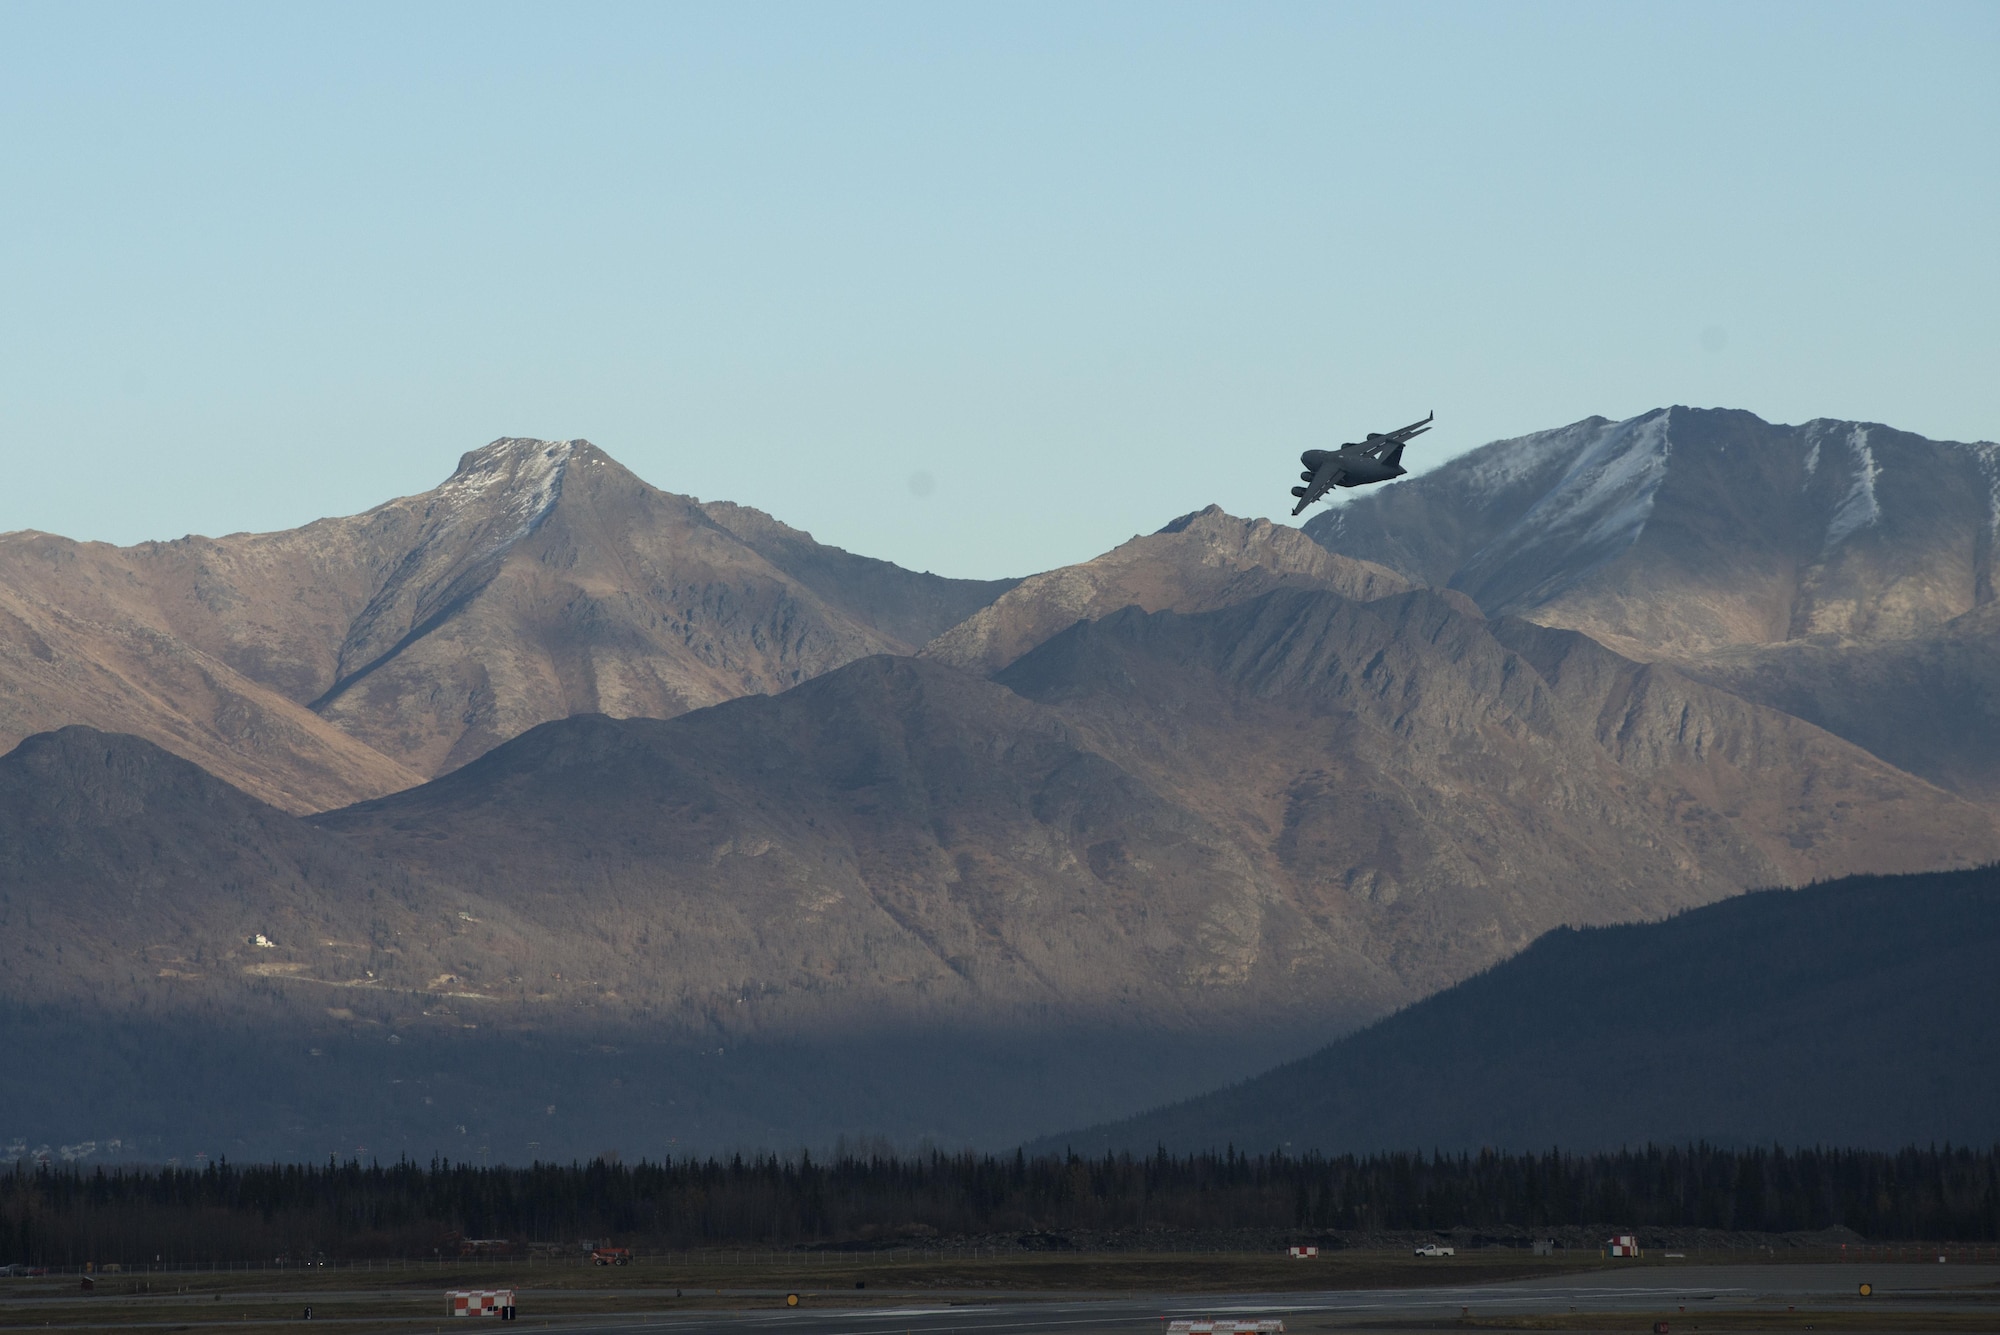 A U.S. Air Force C-17 Globemaster III departs Joint Base Elmendorf-Richardson, Alaska during Red Flag - Alaska 17-1 Oct. 12, 2016. RF-A is a joint exercise focused on improving combat readiness of the U.S. military and international forces, which included the Republic of Korea Air Force and Royal New Zealand Air Force this iteration. 